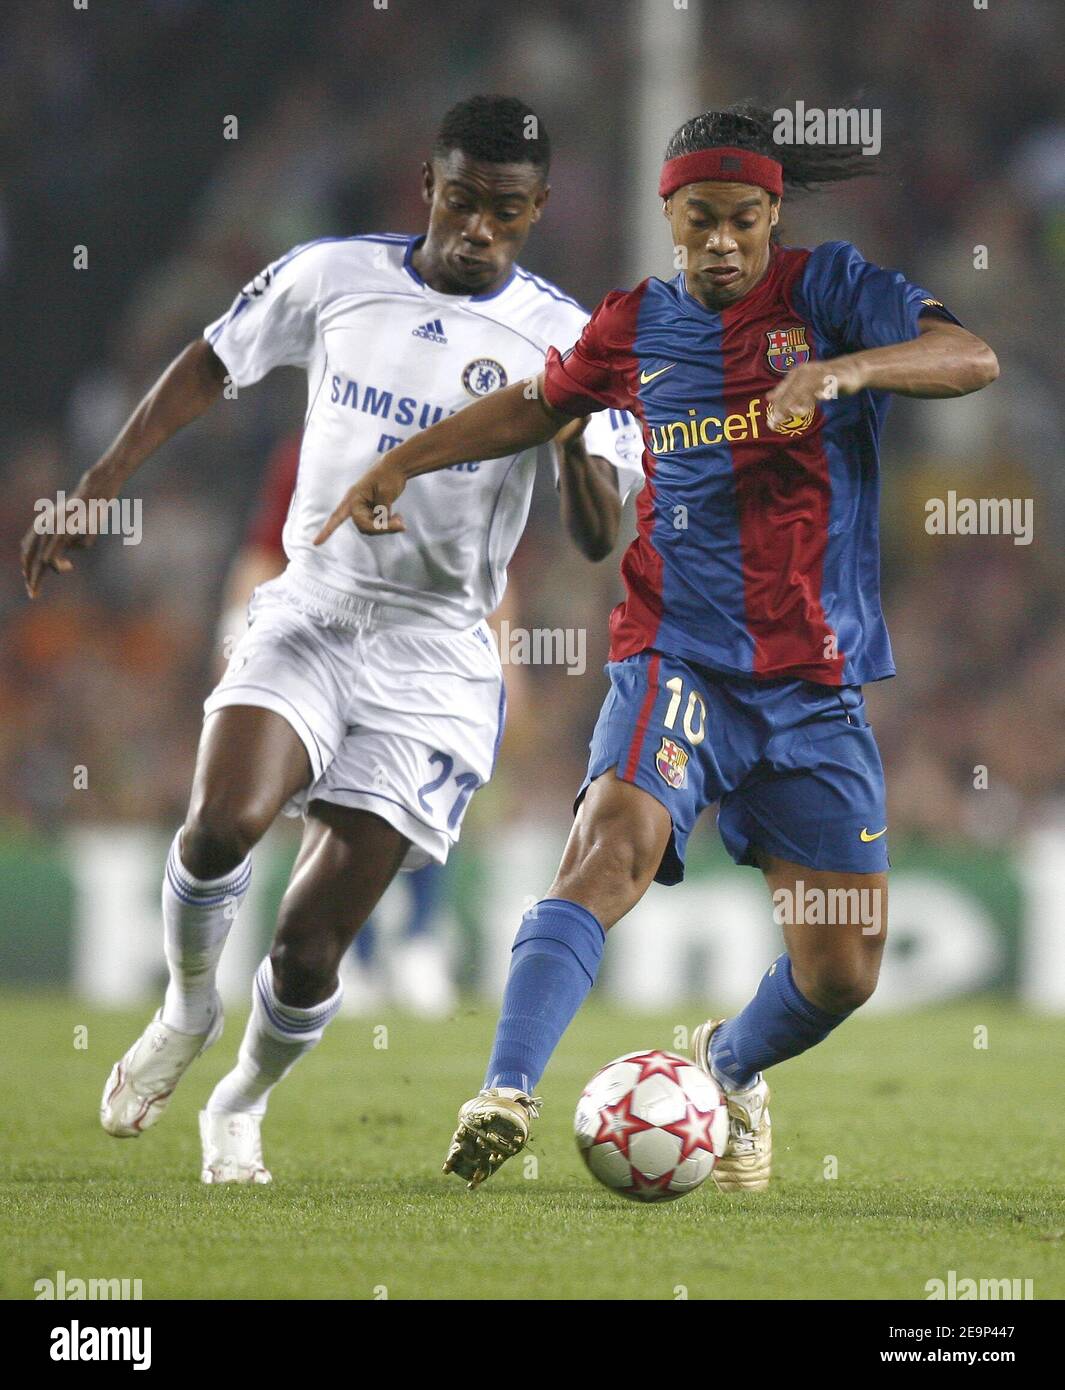 Barcelona's Ronaldinho and Chelsea's Salomon Kalou battle for the ball  during the UEFA Champions League, Group A, Barcelona vs Chelsea at the Camp  Nou stadium in Barcelona, Spain on October 31, 2006.